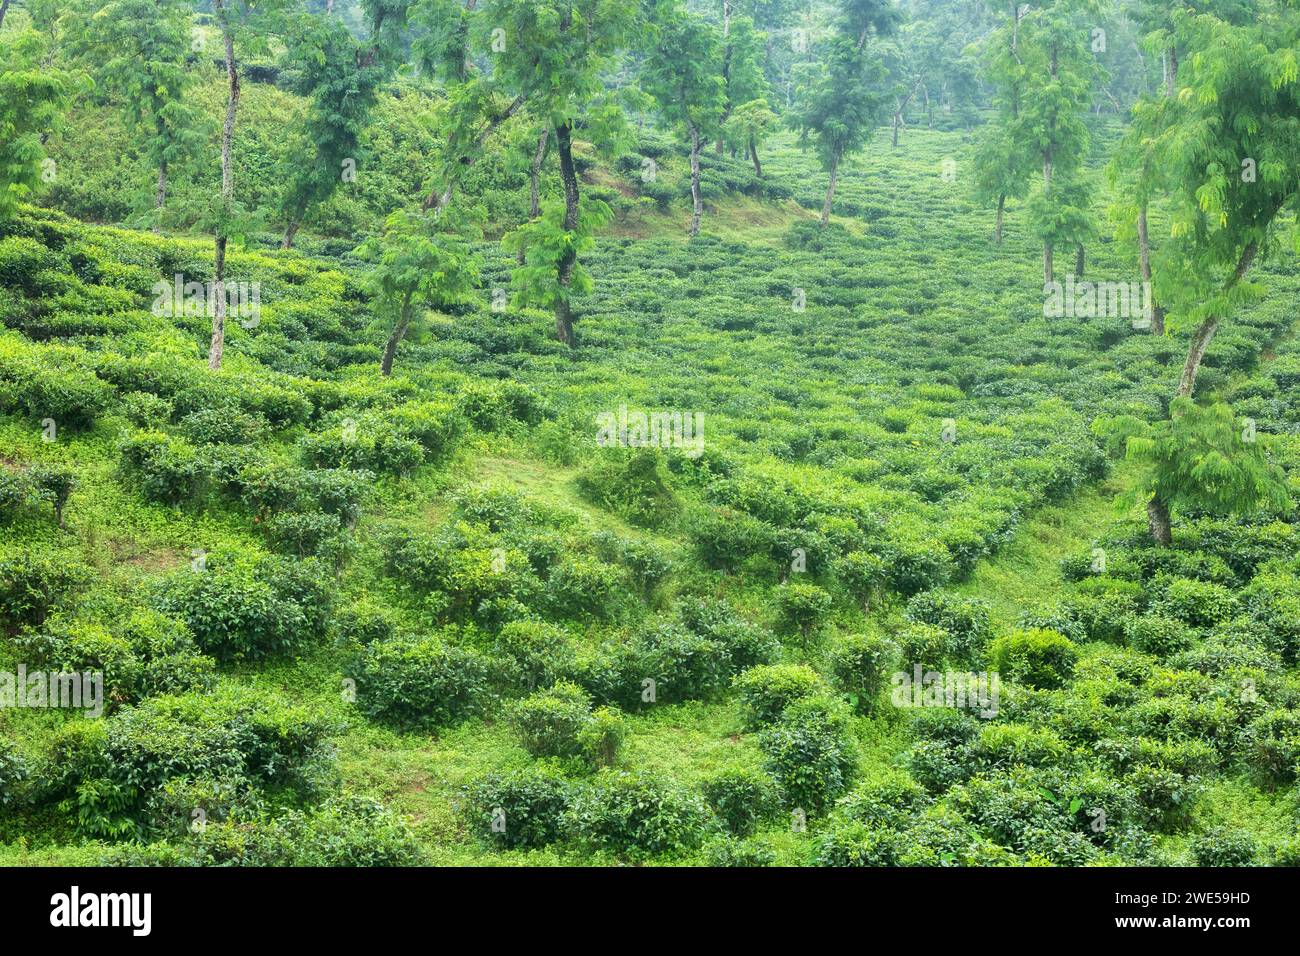 The tea garden was very beautiful located in srimangale moulvibazar district in sylhet bangladesh,The tea garden is beautifully landscaped on the slop Stock Photo